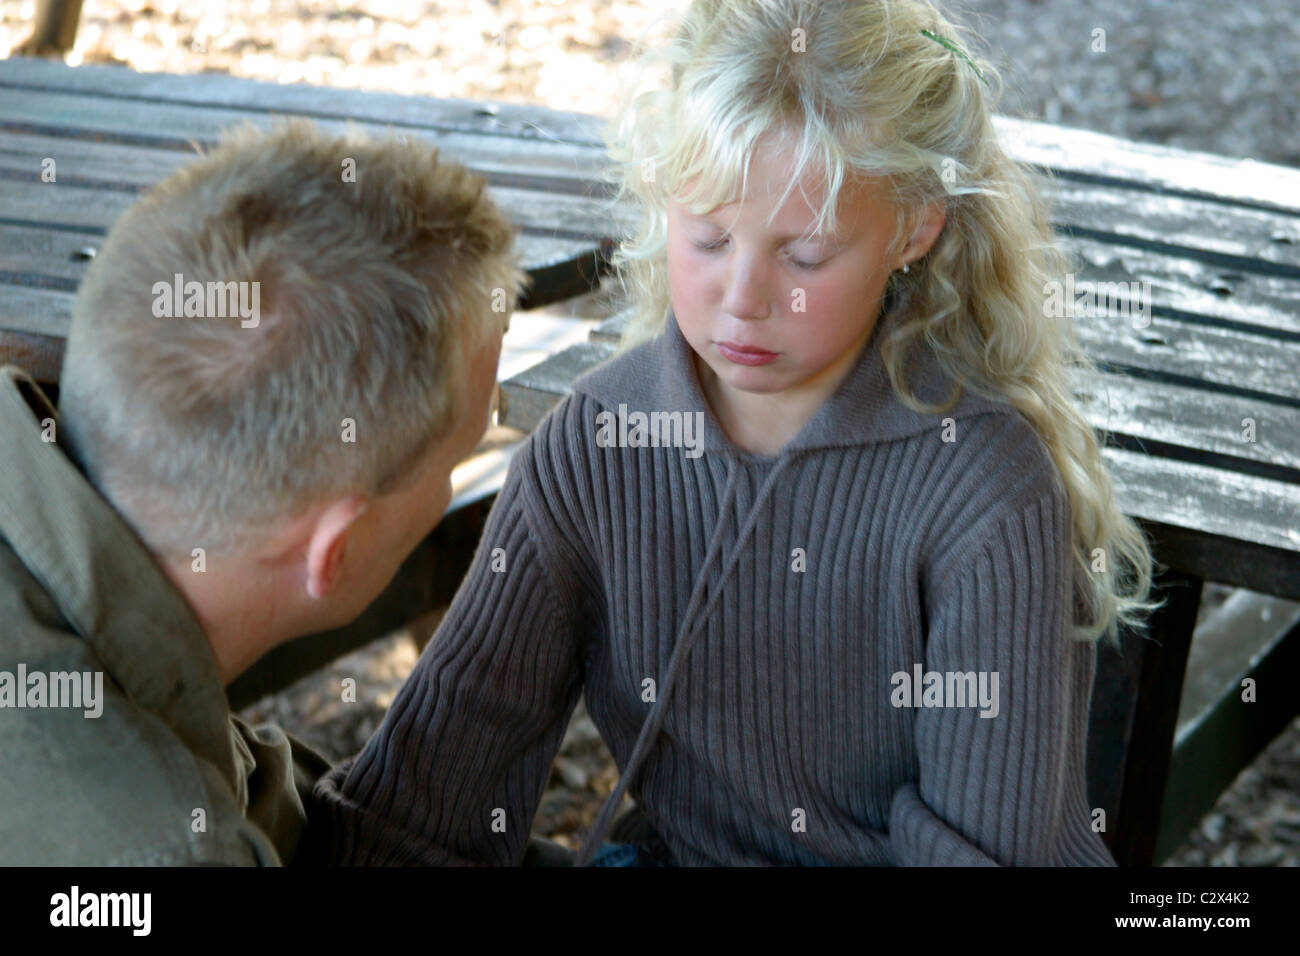 Indulgent father disciplining young girl outside Stock Photo